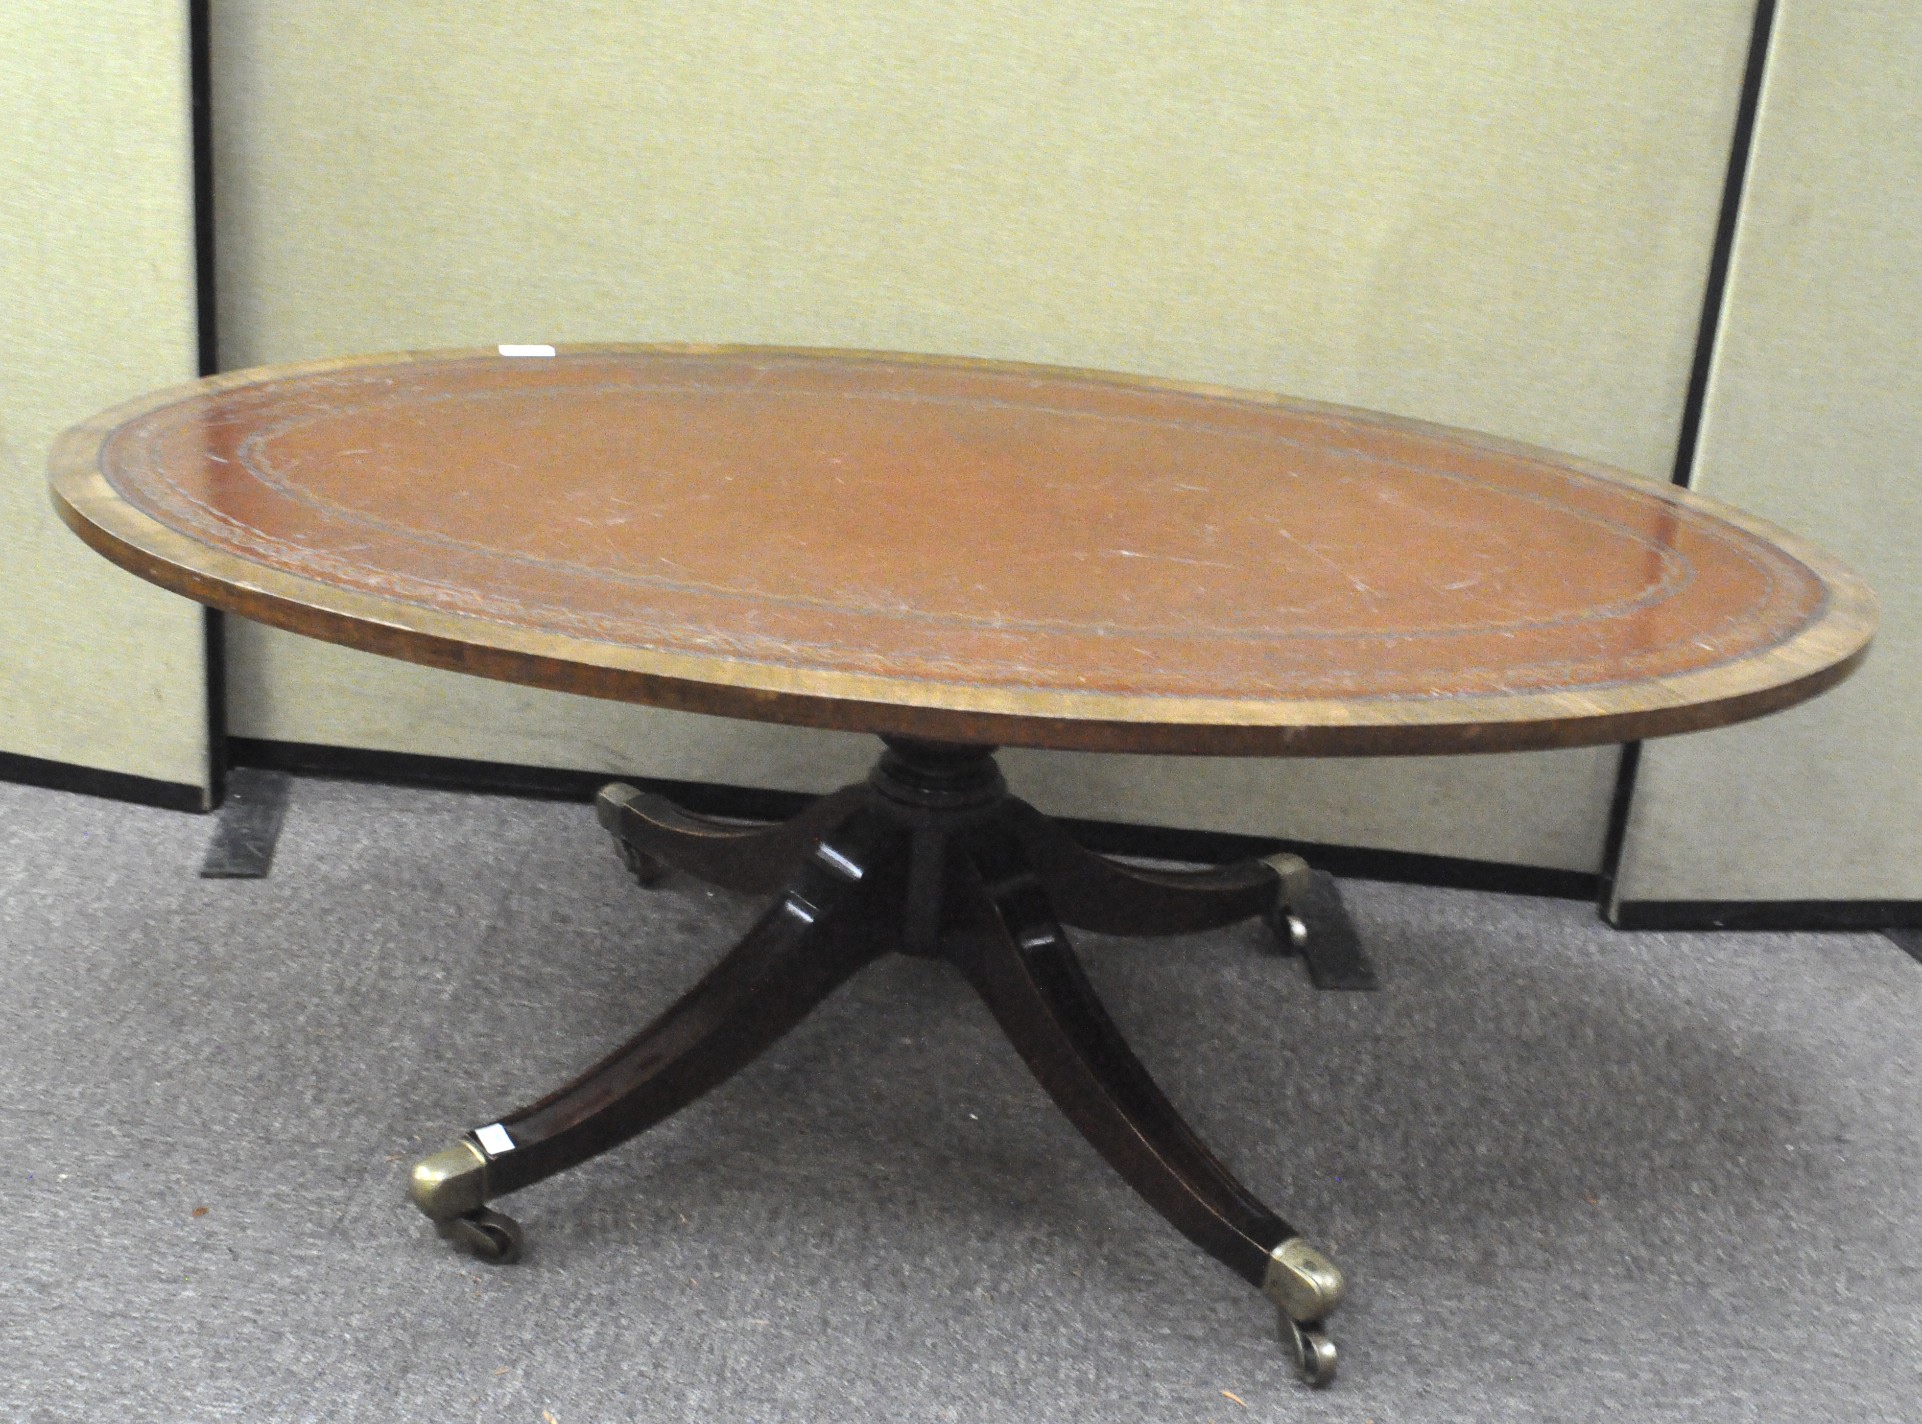 A Victorian oval top mahogany coffee table with leather top on brass castors